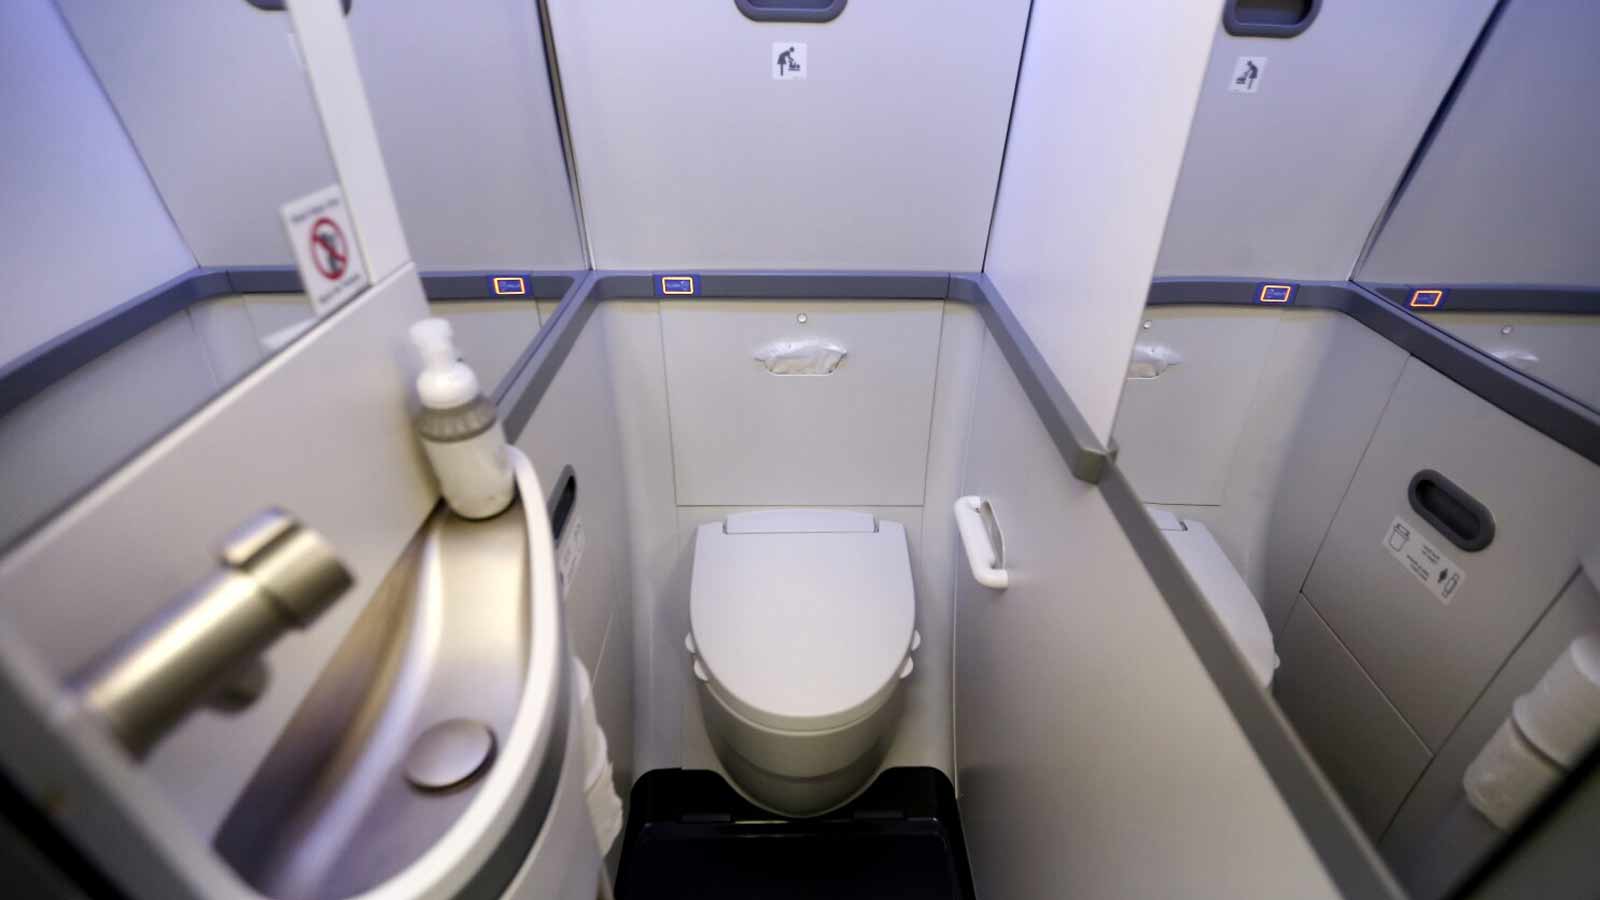 Flight Attendant Explains Why You Should Avoid Toilet Paper On Planes